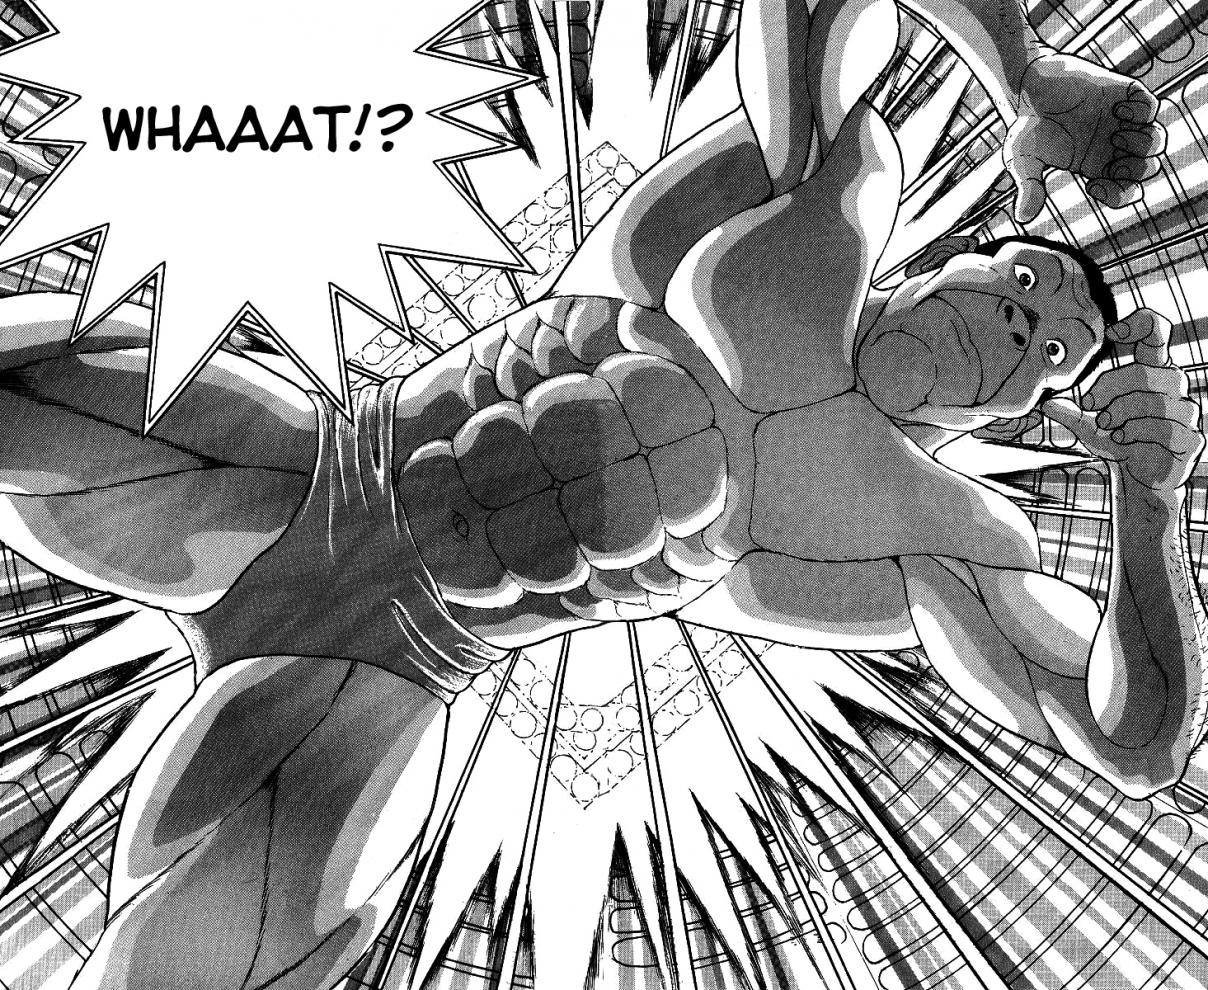 Grappler Baki Vol. 23 Ch. 198 The Giant Takes The Stage!!